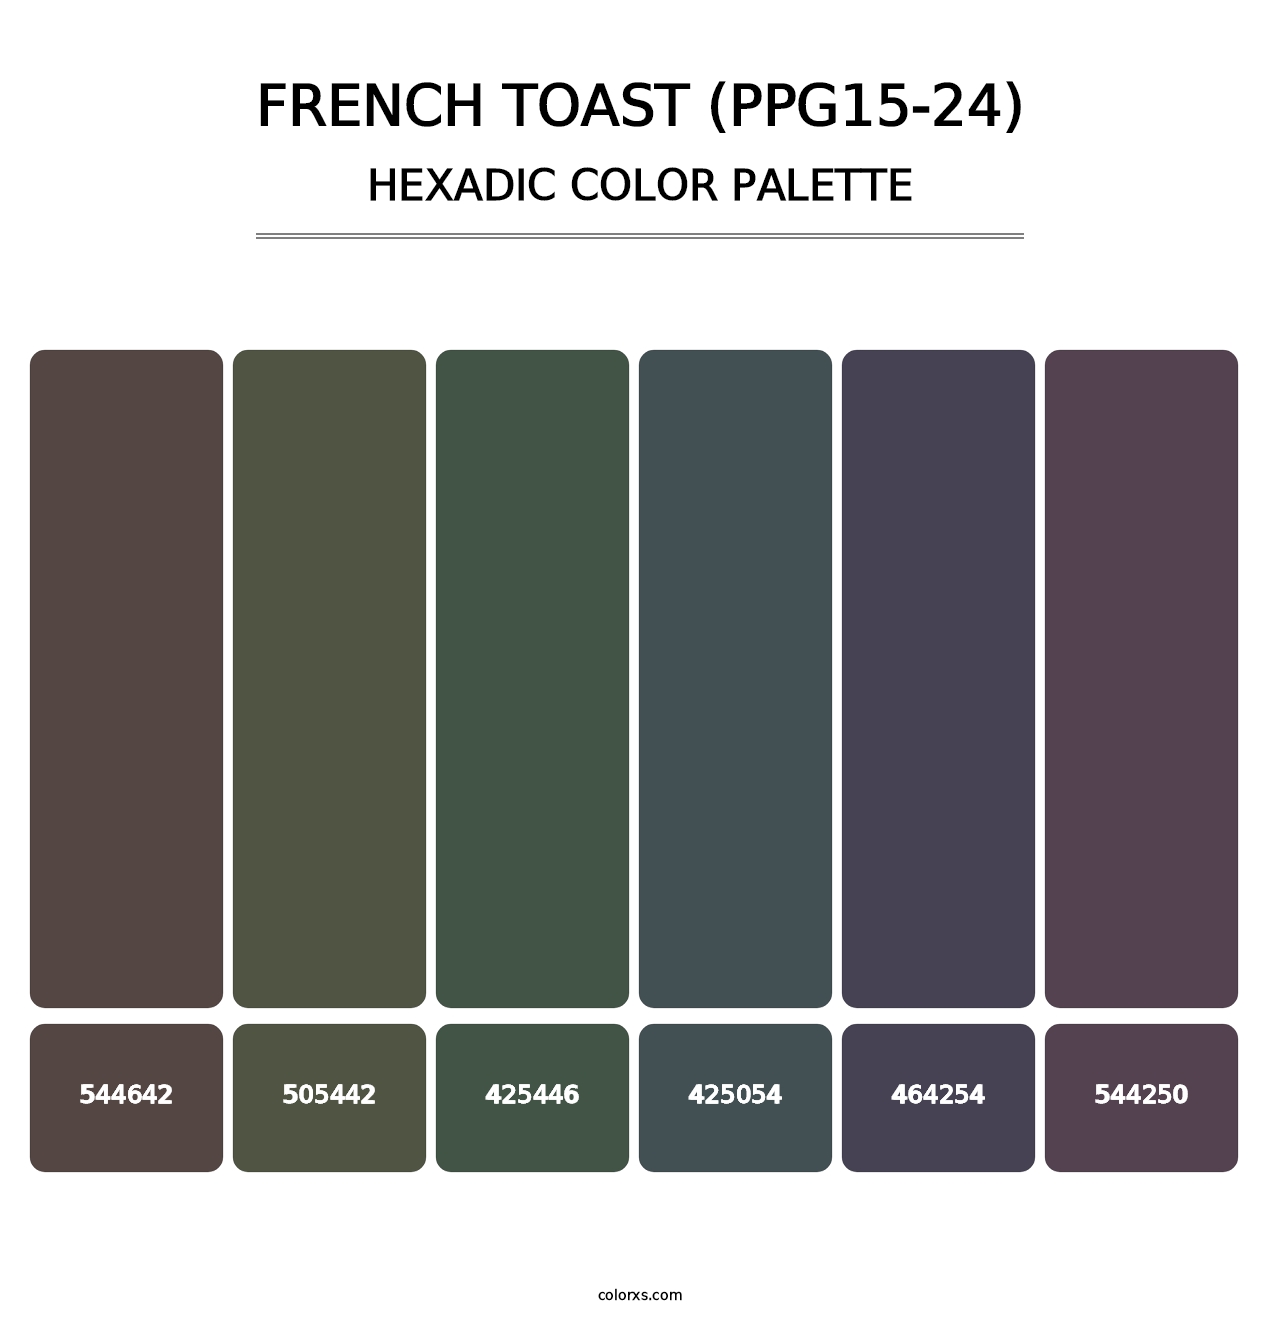 French Toast (PPG15-24) - Hexadic Color Palette